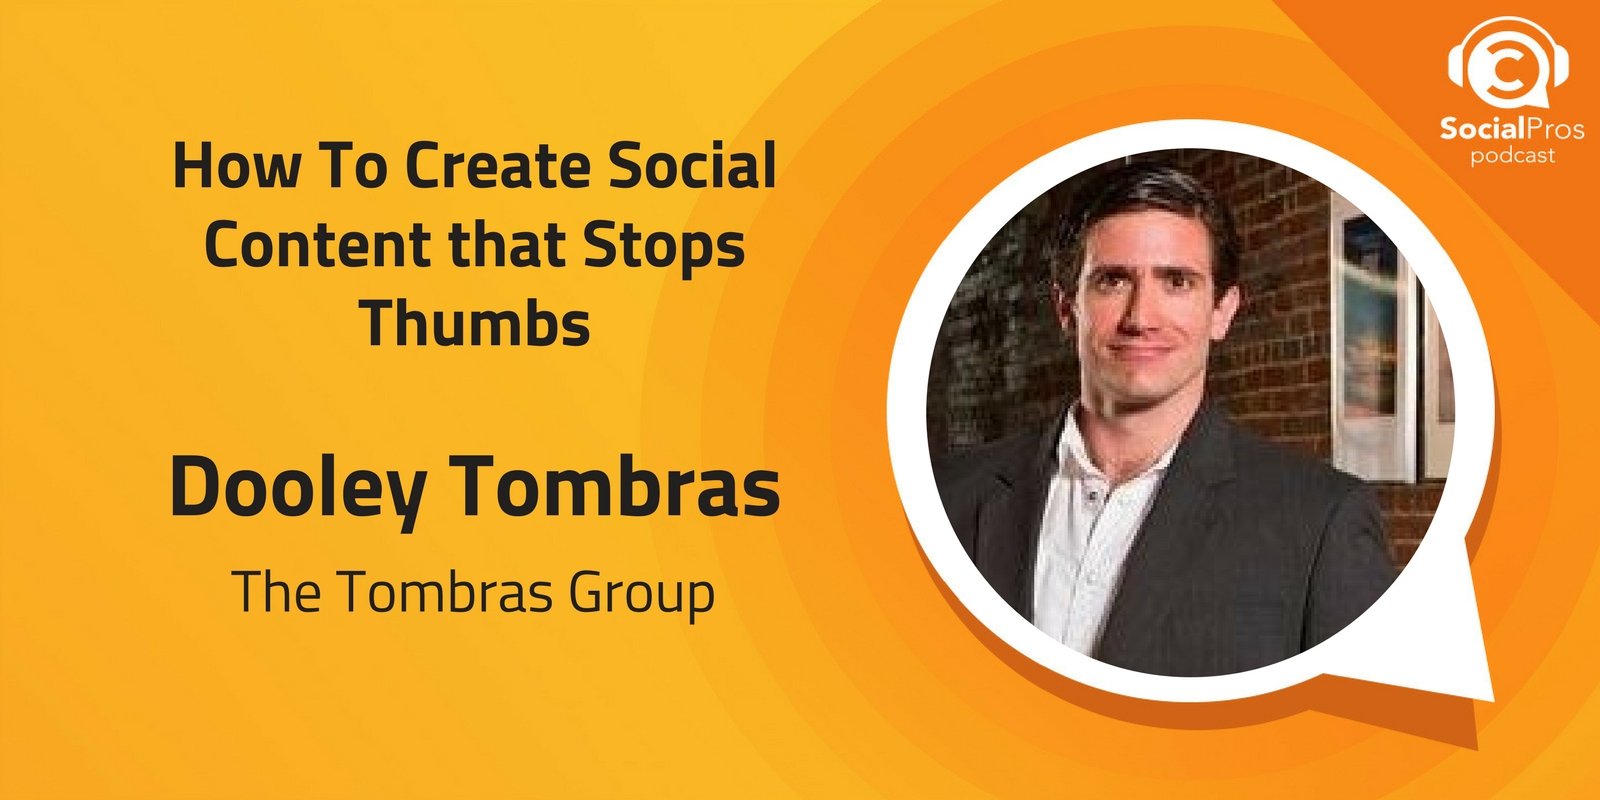 How To Create Social Content that Stops Thumbs